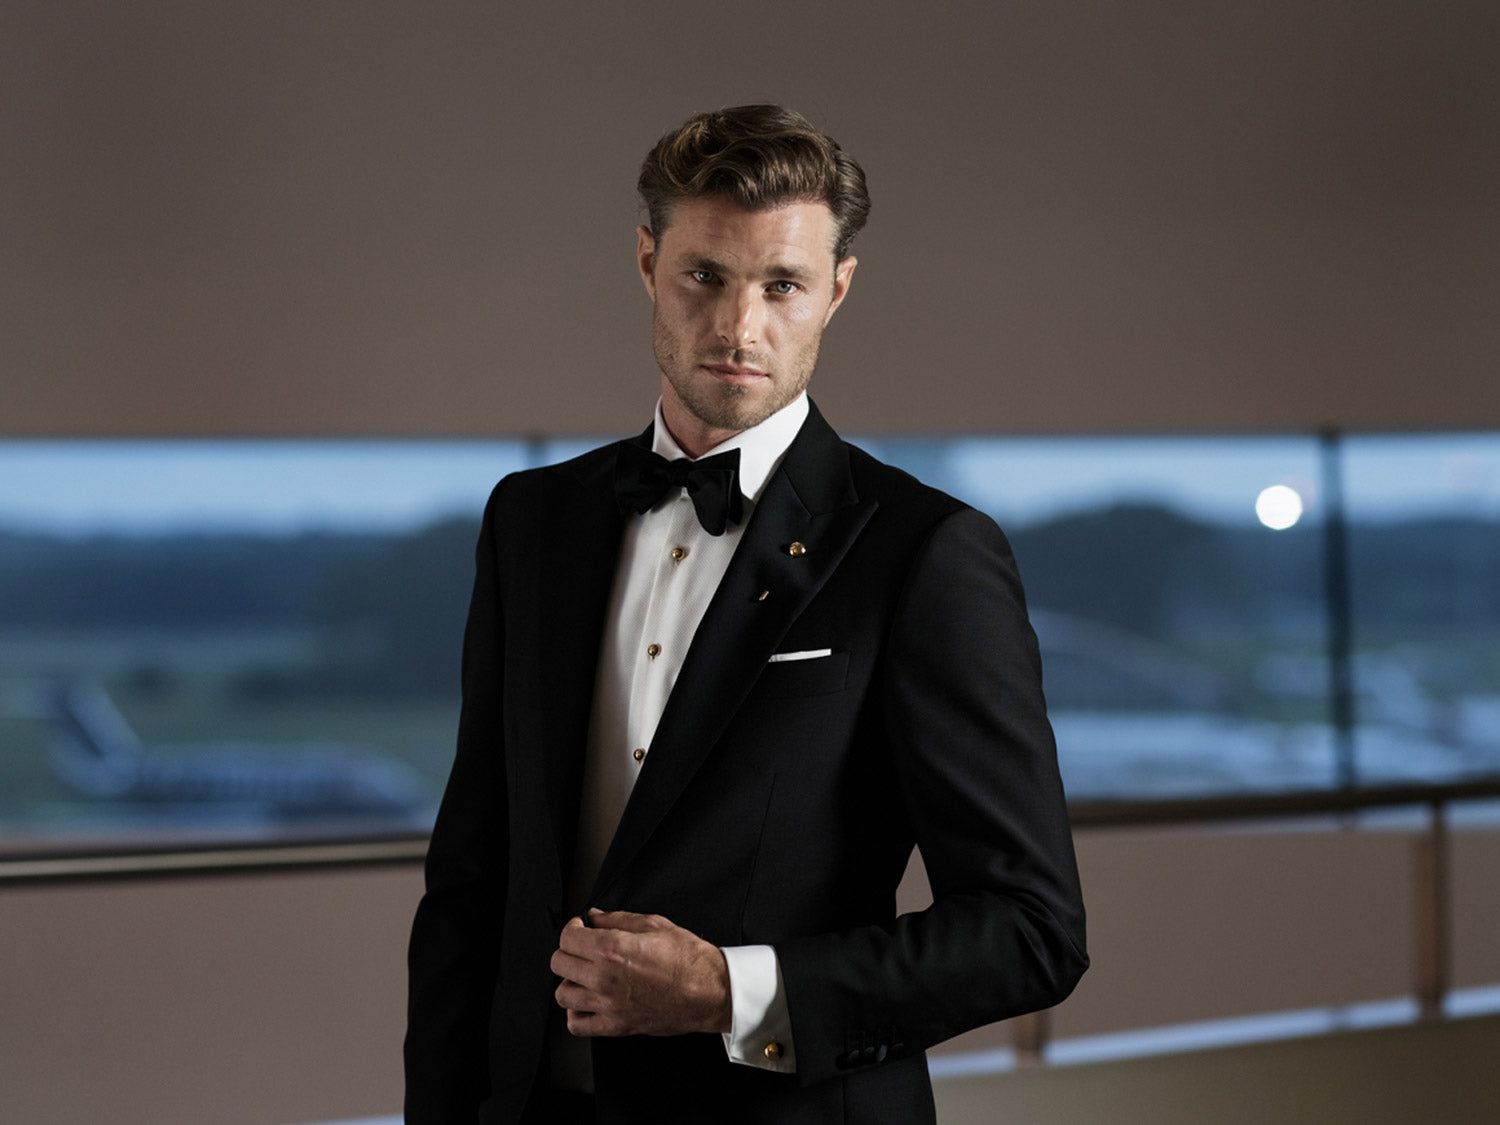 Tuxedo Styles for Special Occasions & Formal Events | Men's Wearhouse